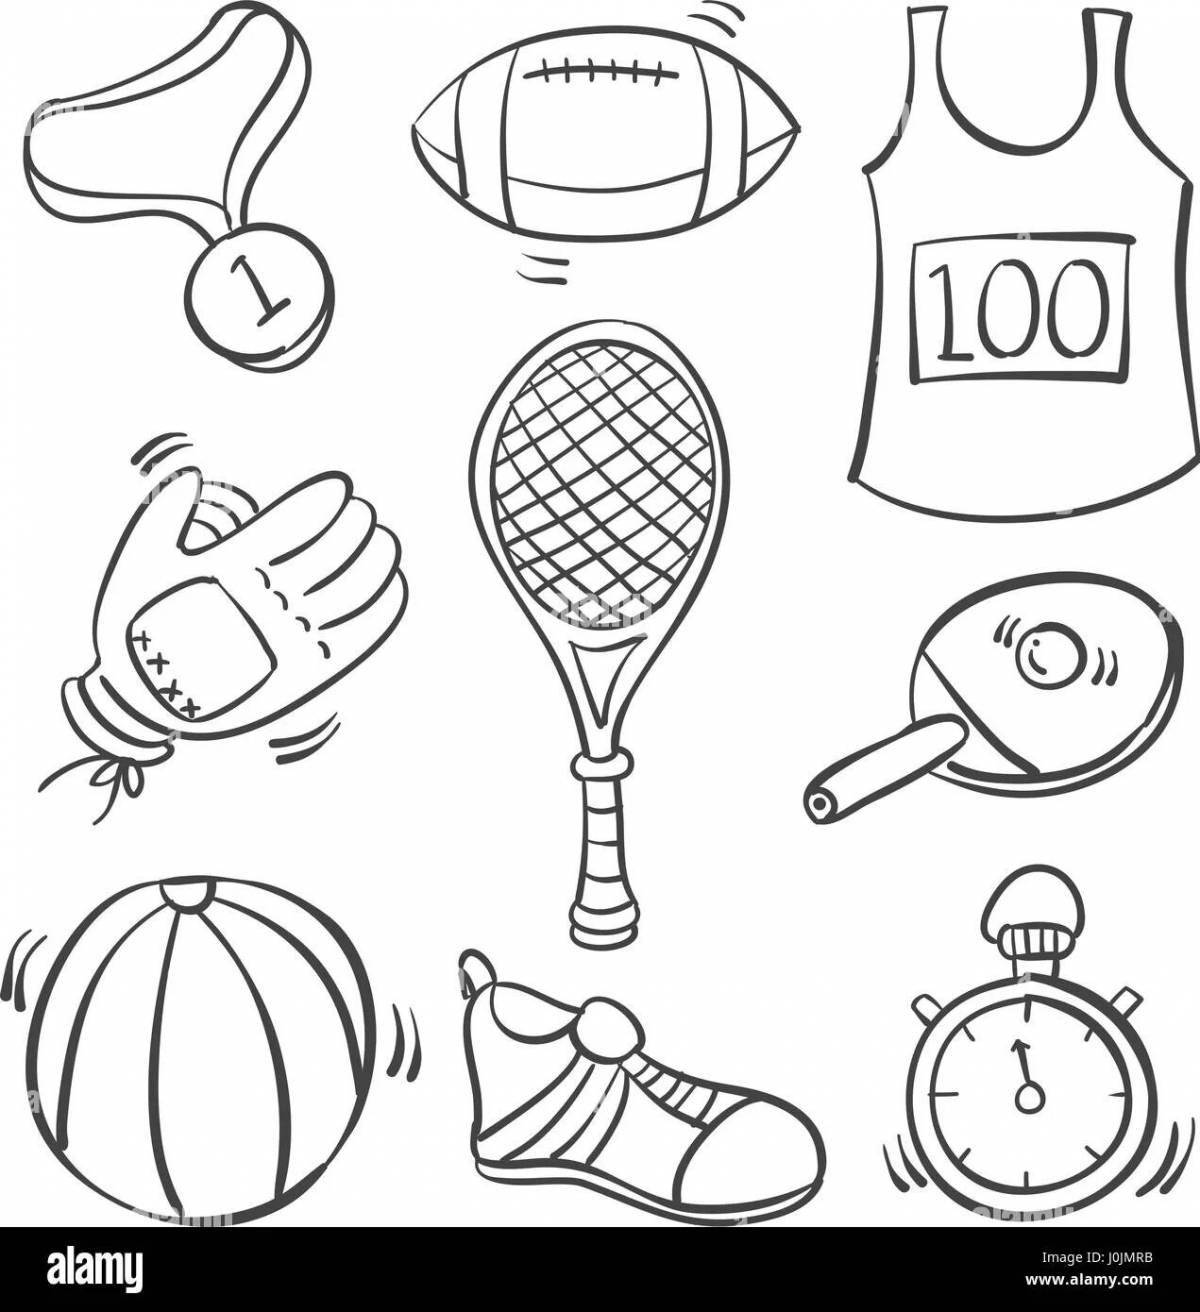 Exquisite sports equipment coloring page